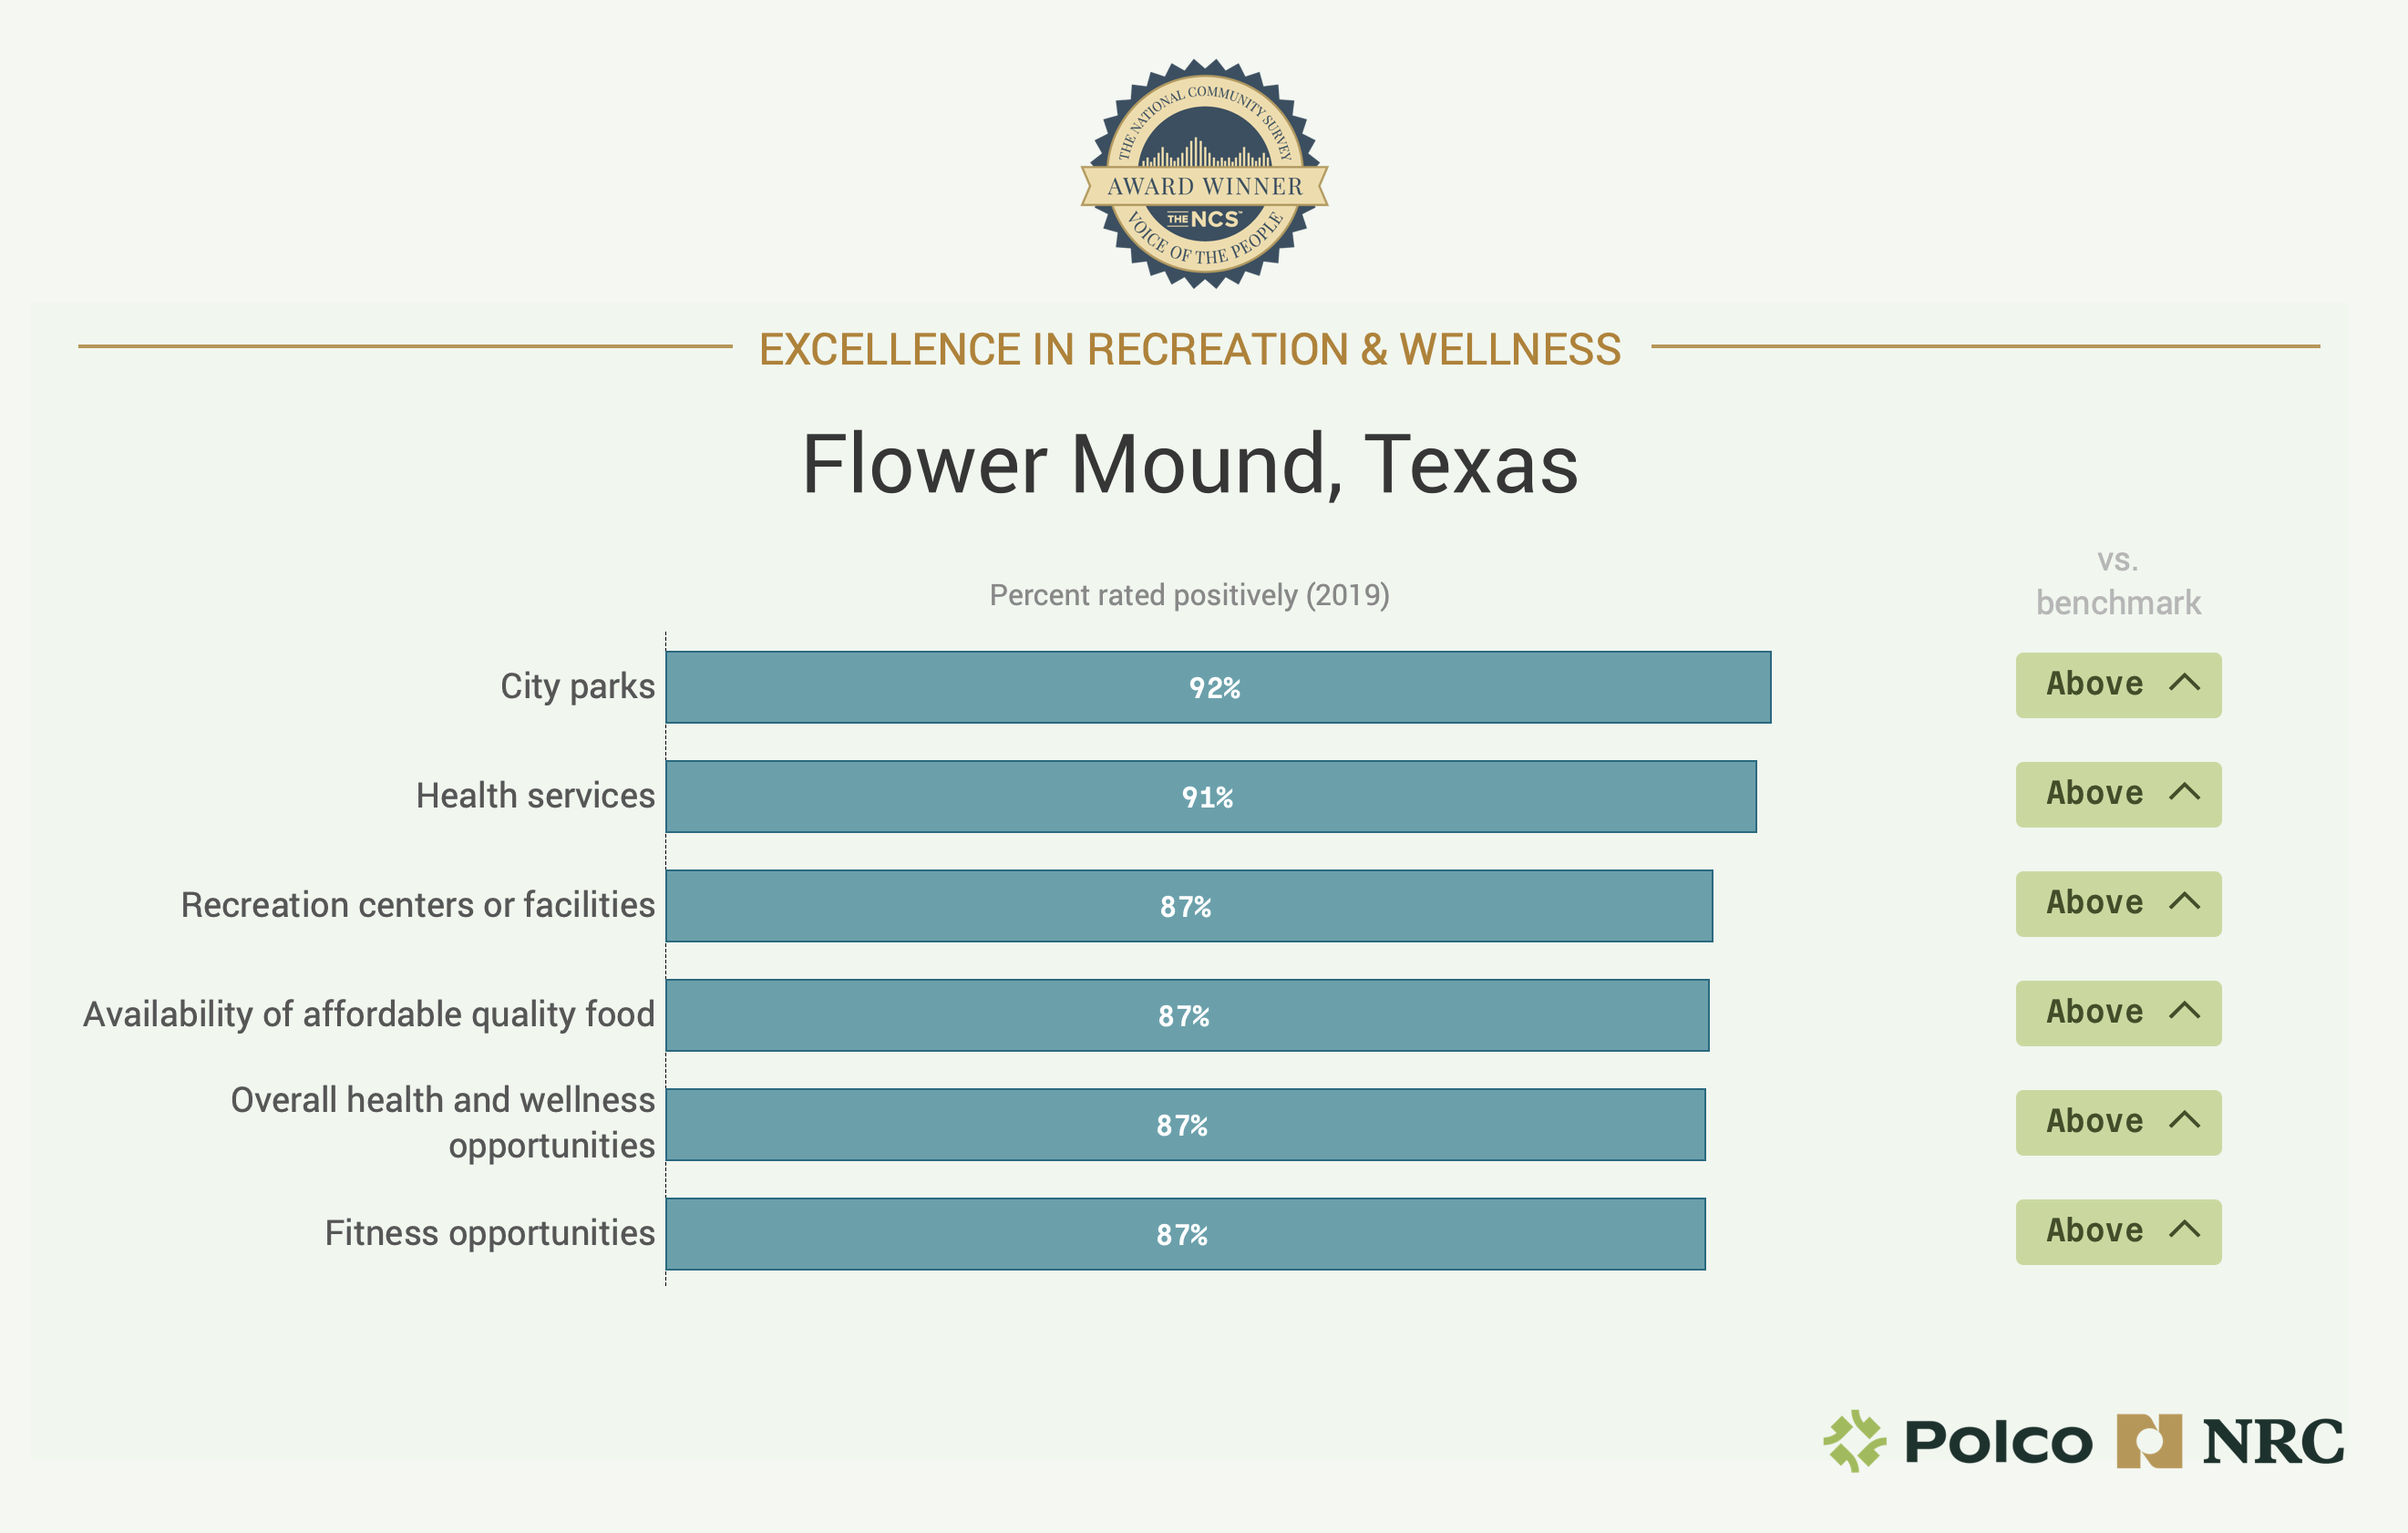 Chart showing Flower Mound, Texas' Excellence in Recreation and Wellness